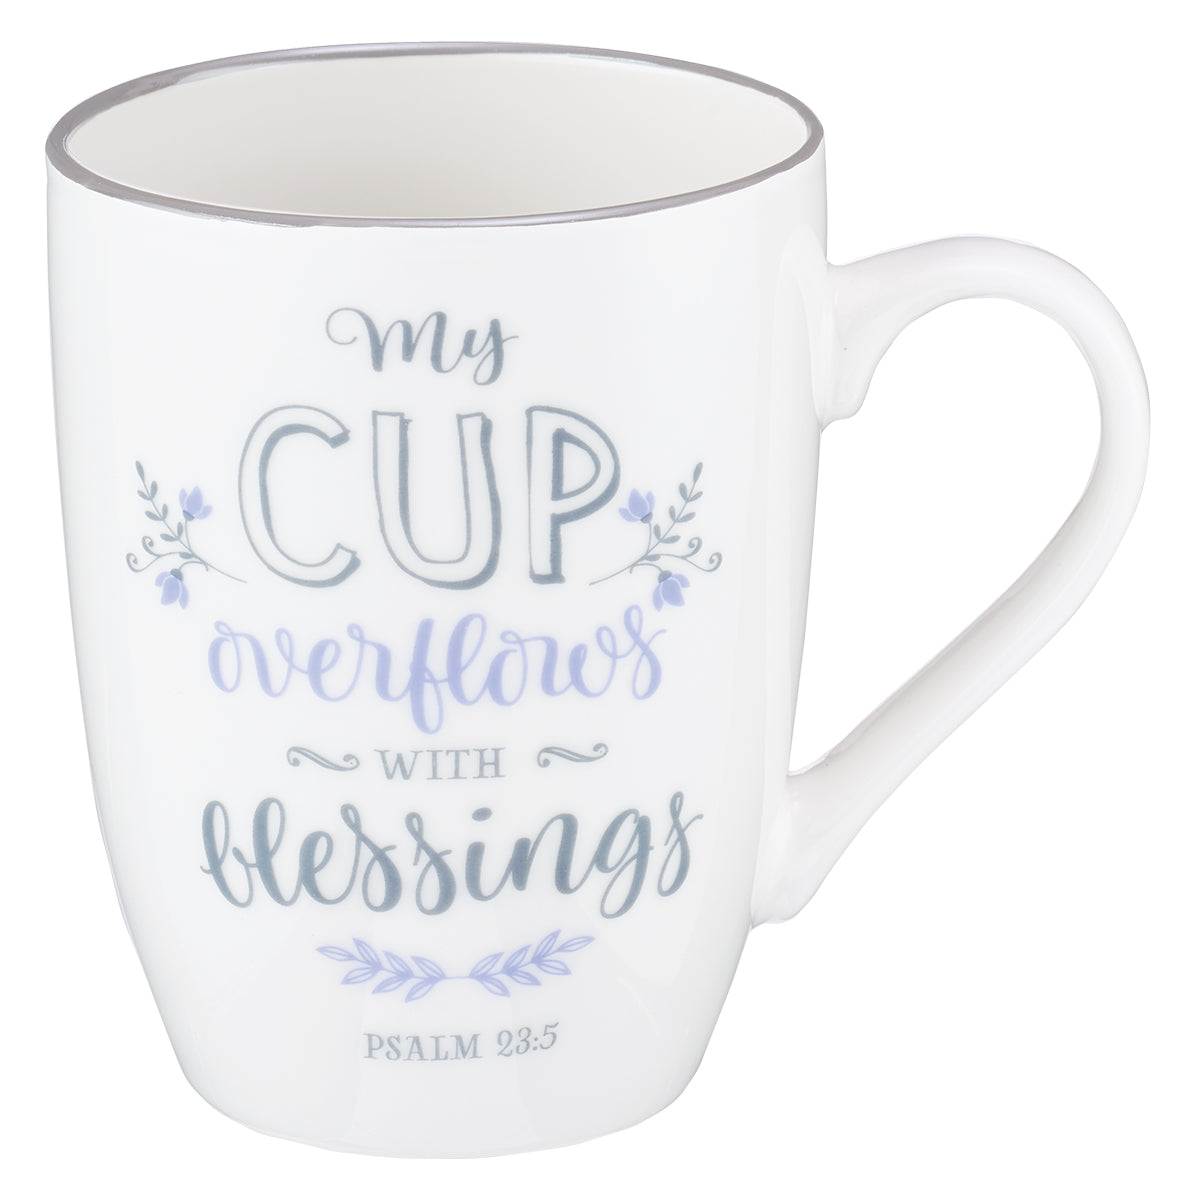 Image of My Cup Overflows Coffee Mug - Psalm 23:5 other